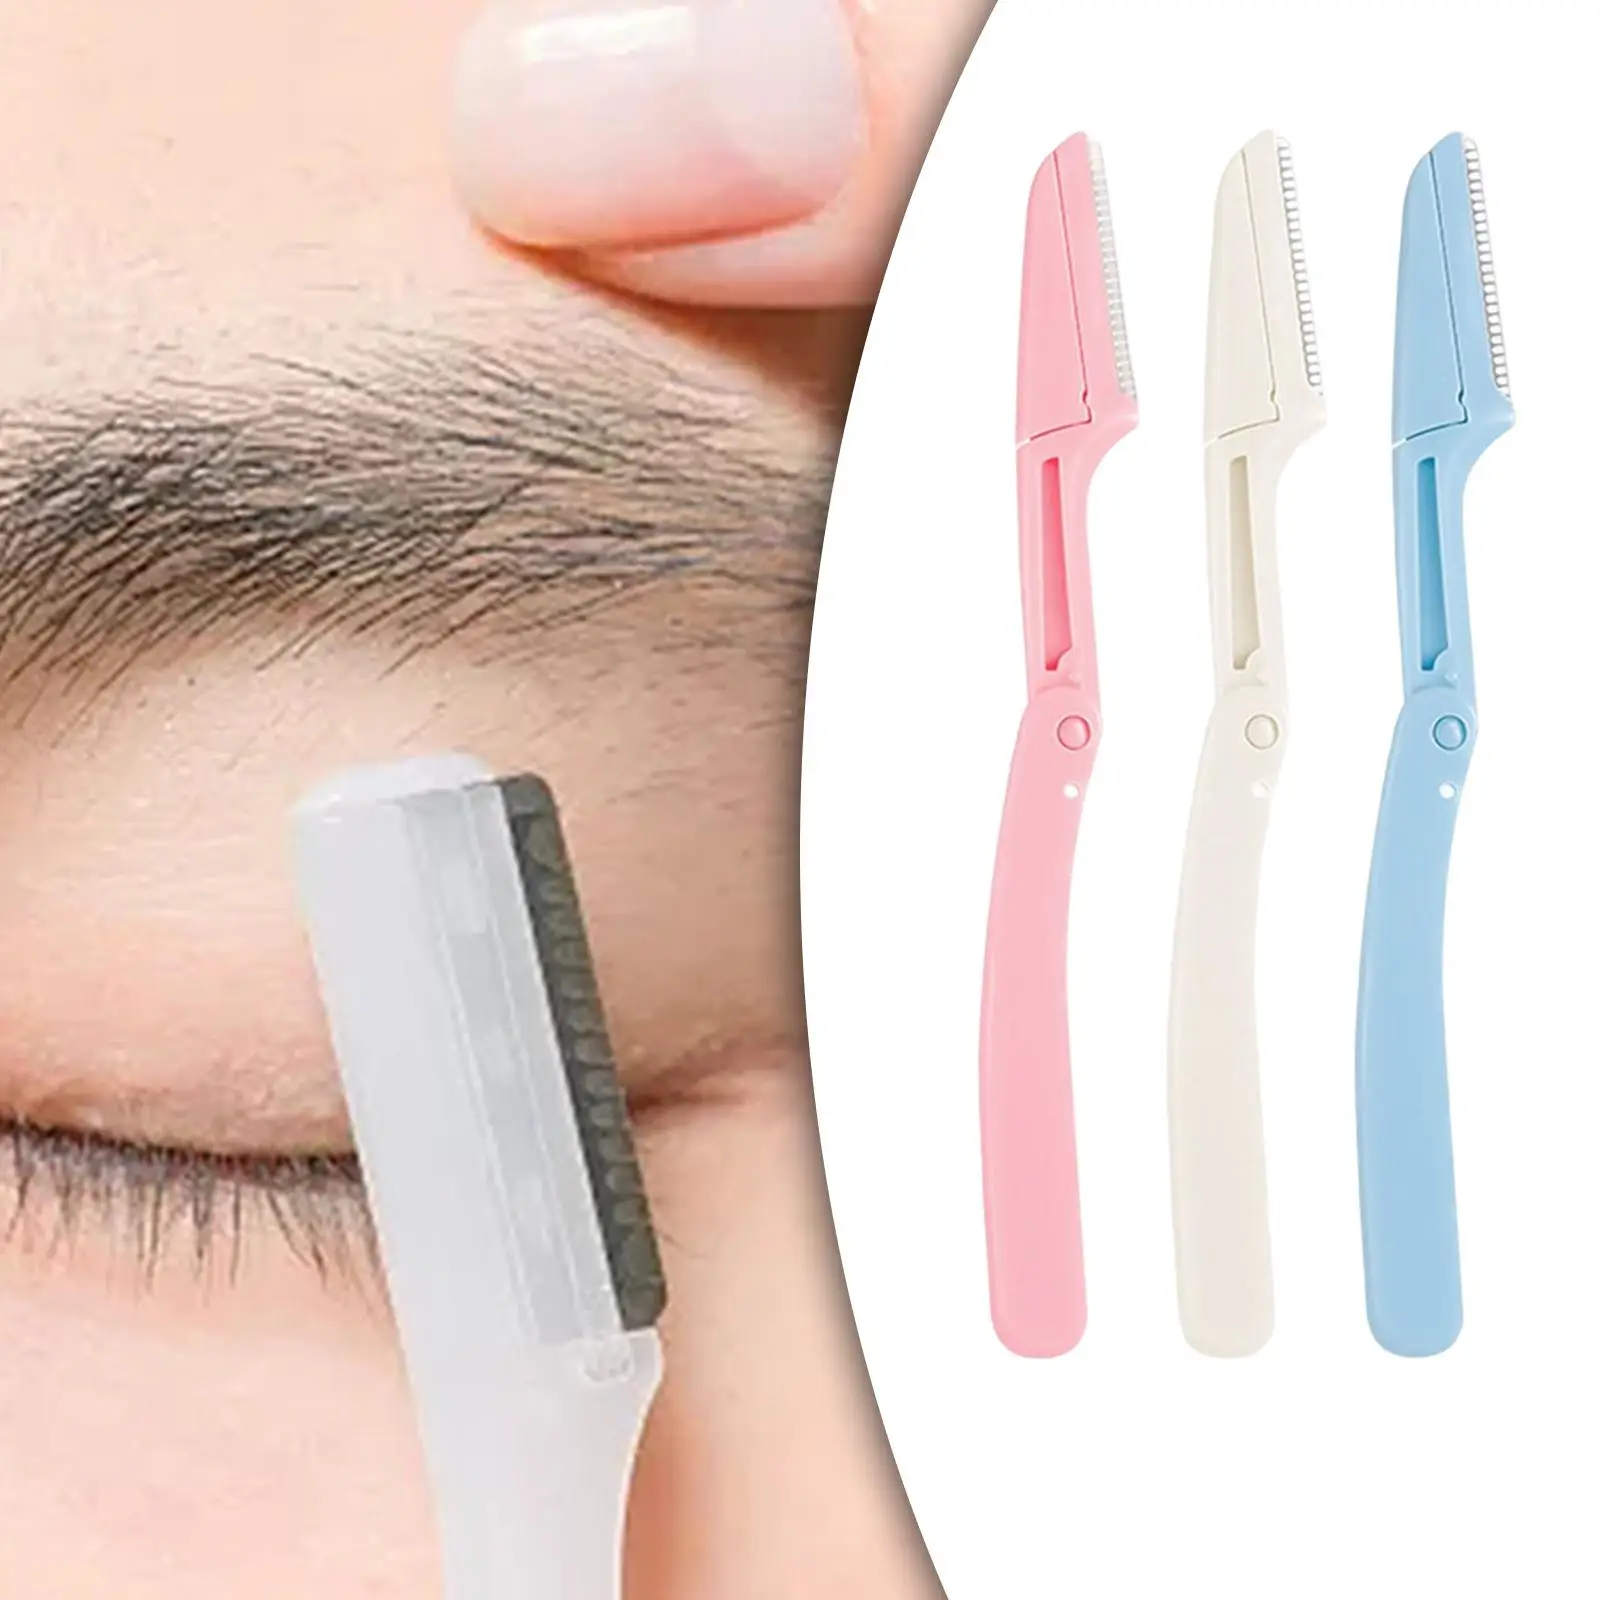 3x Multipurpose Eyebrow Shaper Makeup Tool Smoothing Trimming Women Men Facial Hair Remover for Lips Home legs Face